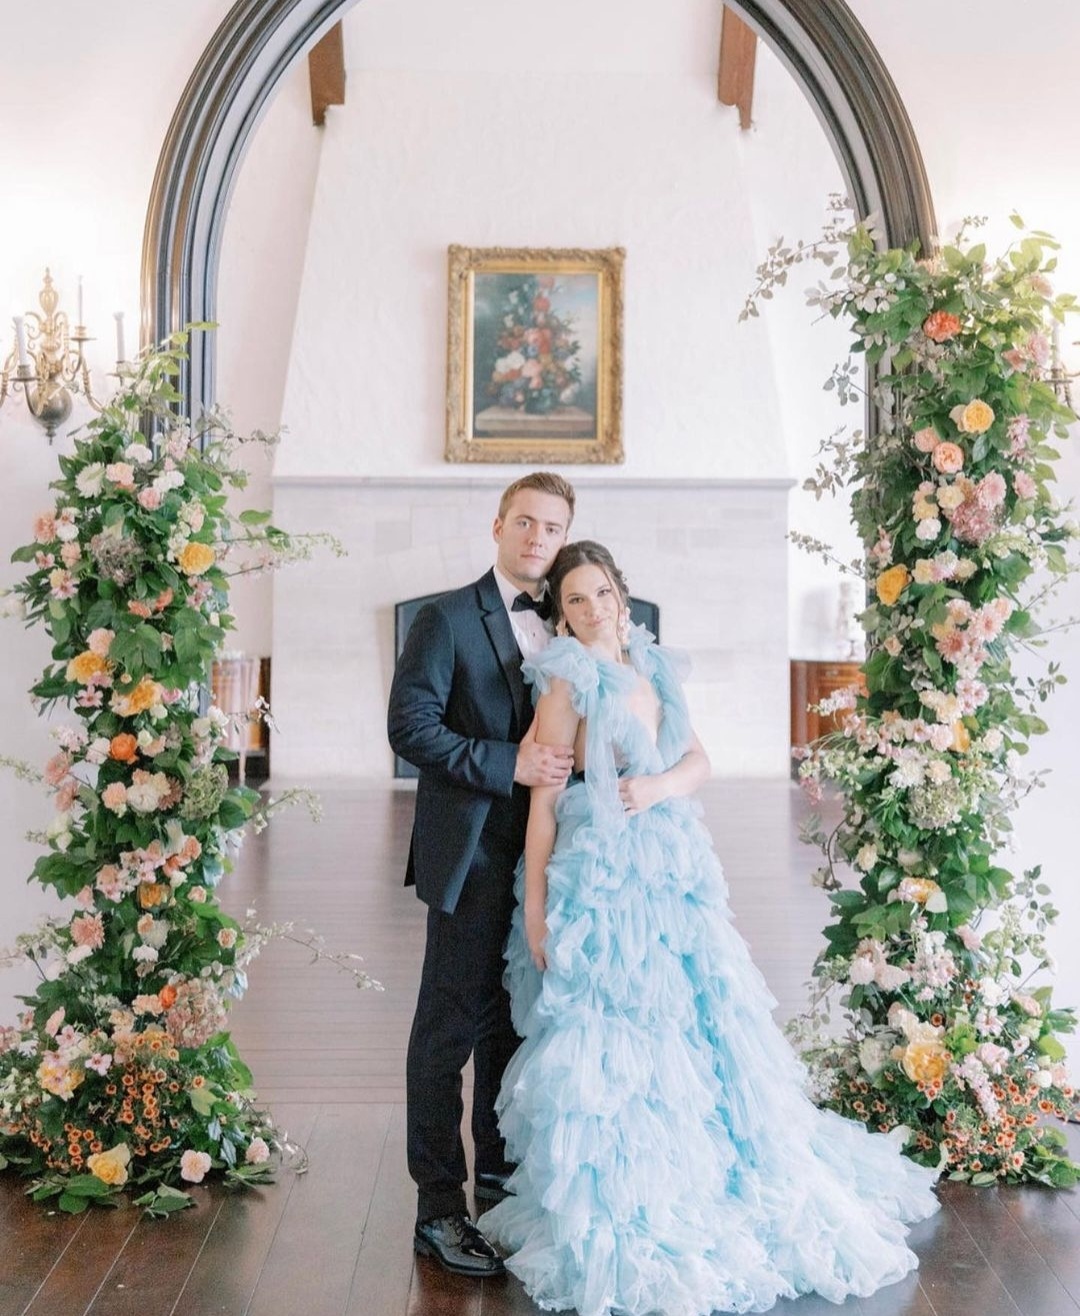 groom in black tux, standing next to bride in light blue dress. to the left and right of them are two vertical, floral arrangements